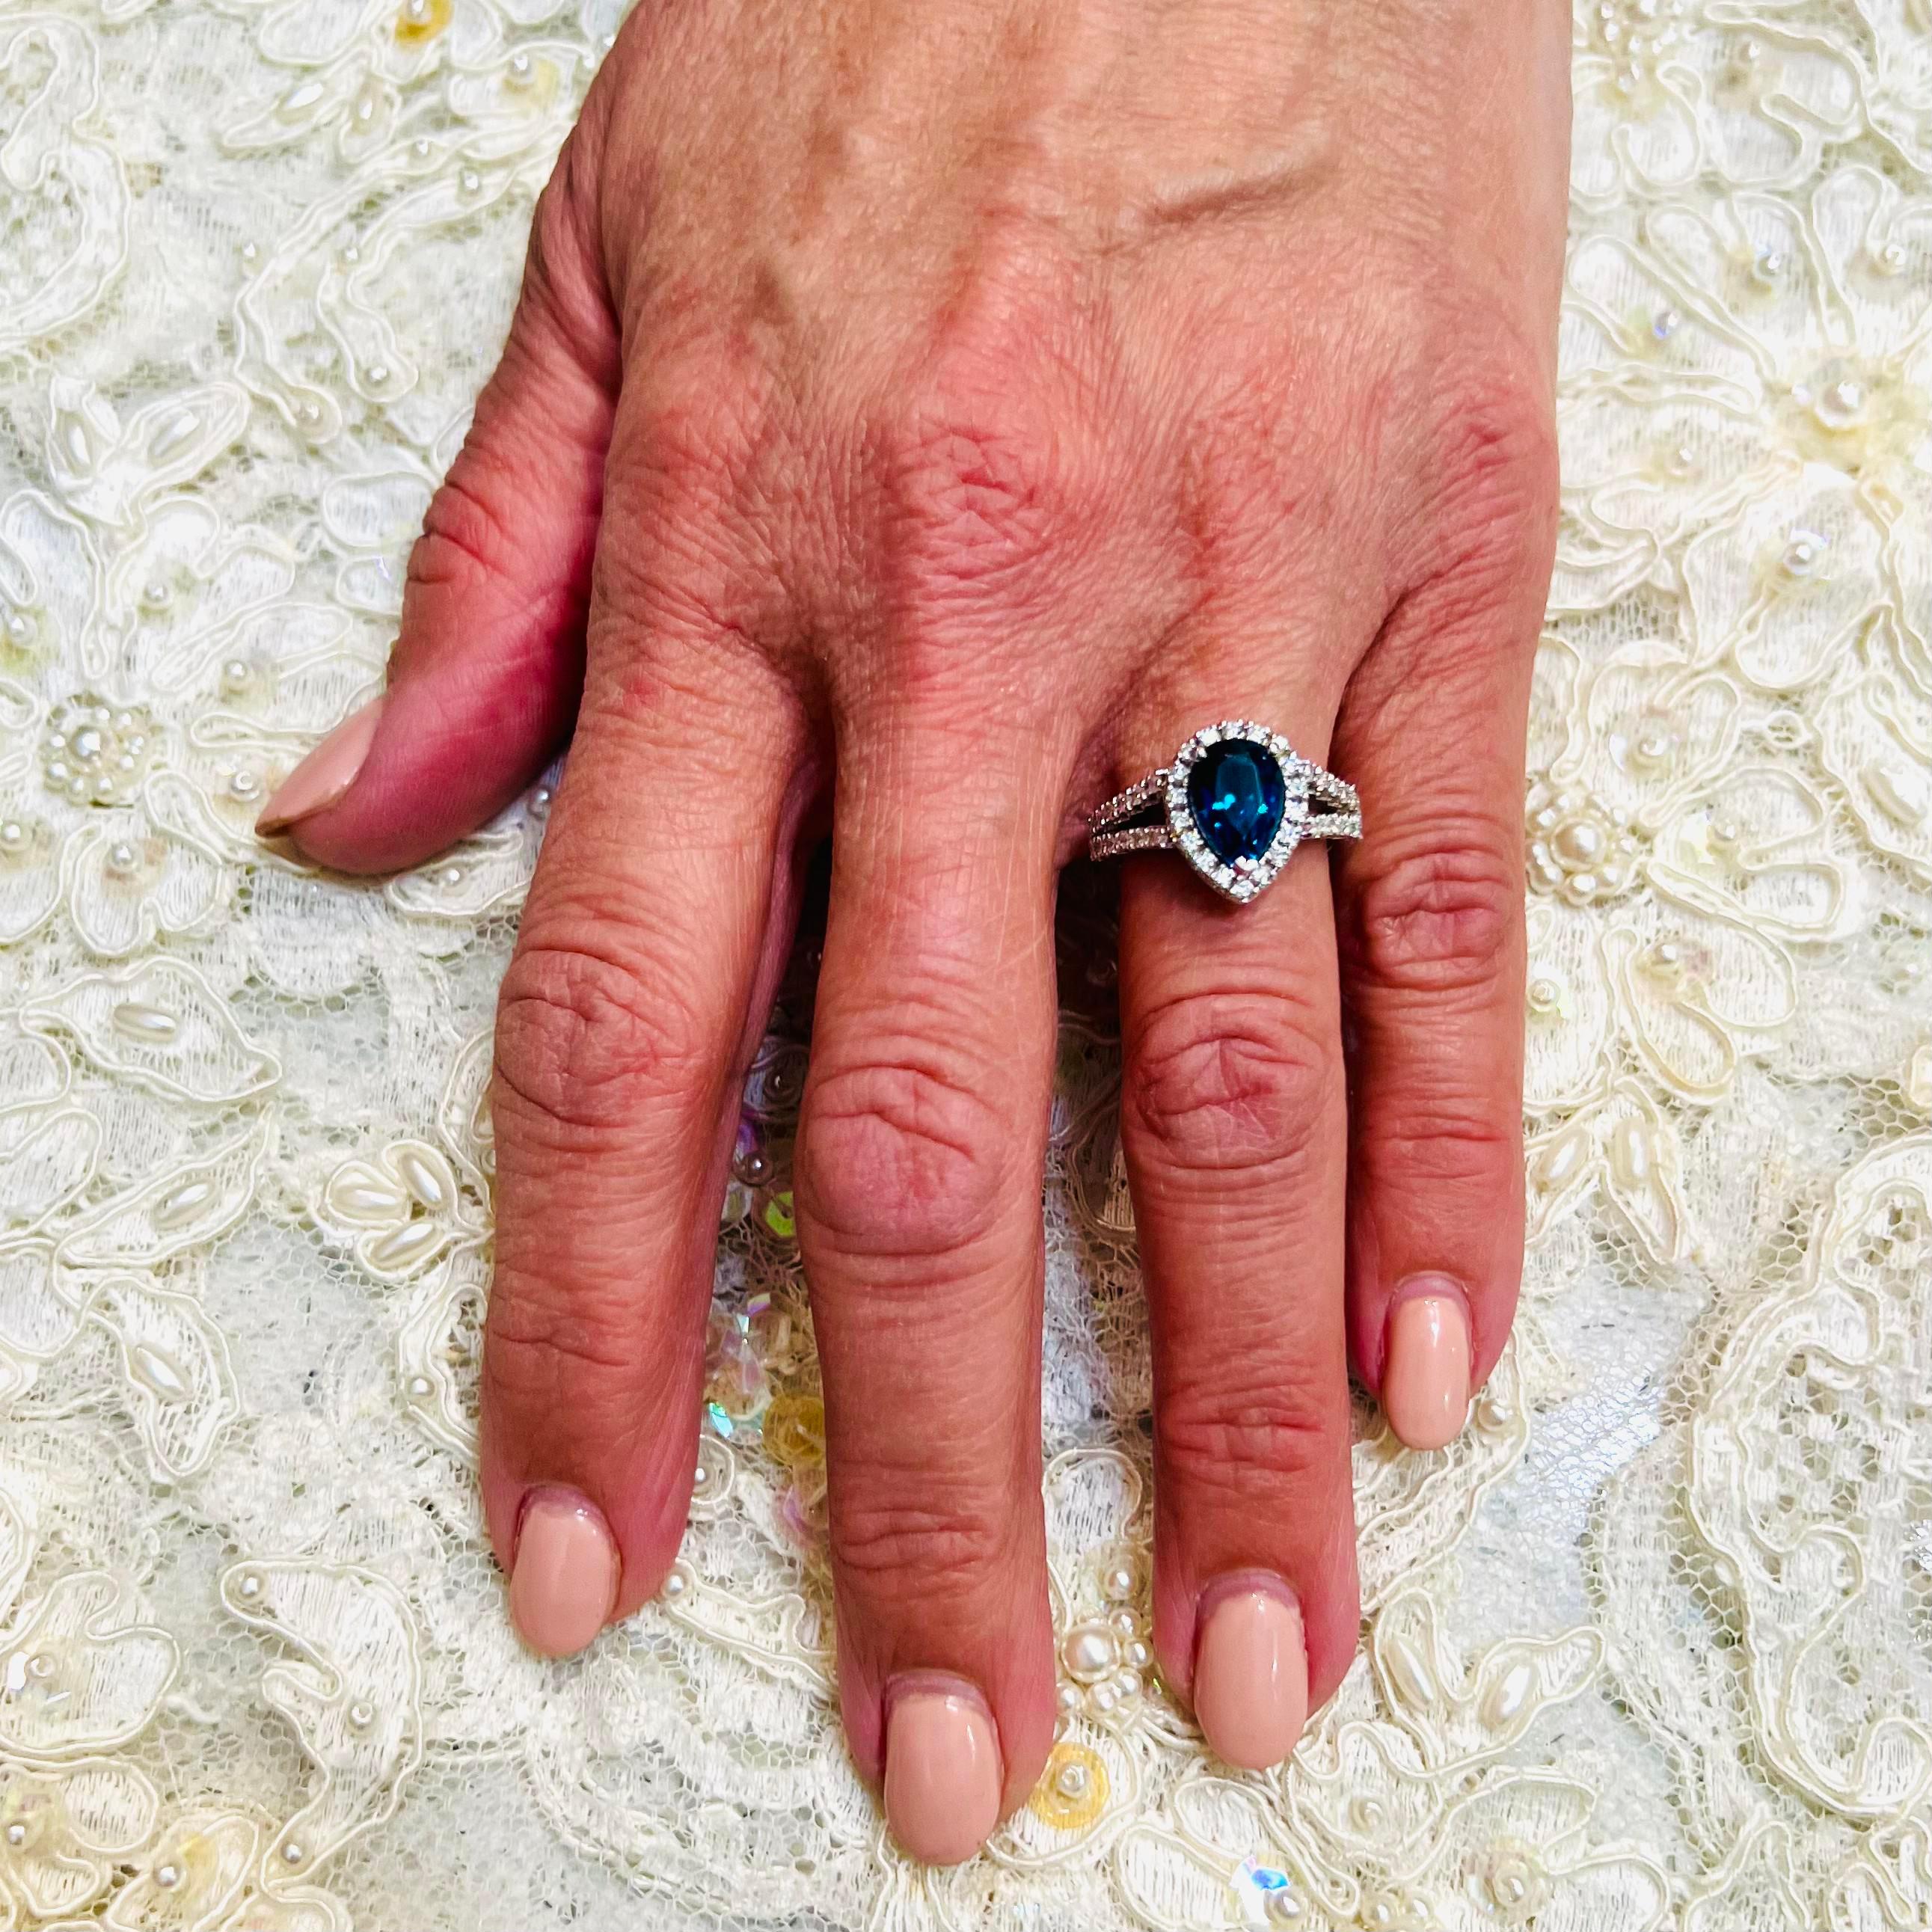 Natural Blue Topaz Diamond Ring Size 6.5 14k W Gold 3.77 TCW Certified $3,950 300213

This is a one of a Kind Unique Custom Made Glamorous Piece of Jewelry!

Nothing says, “I Love you” more than Diamonds and Pearls!

This item has been Certified,